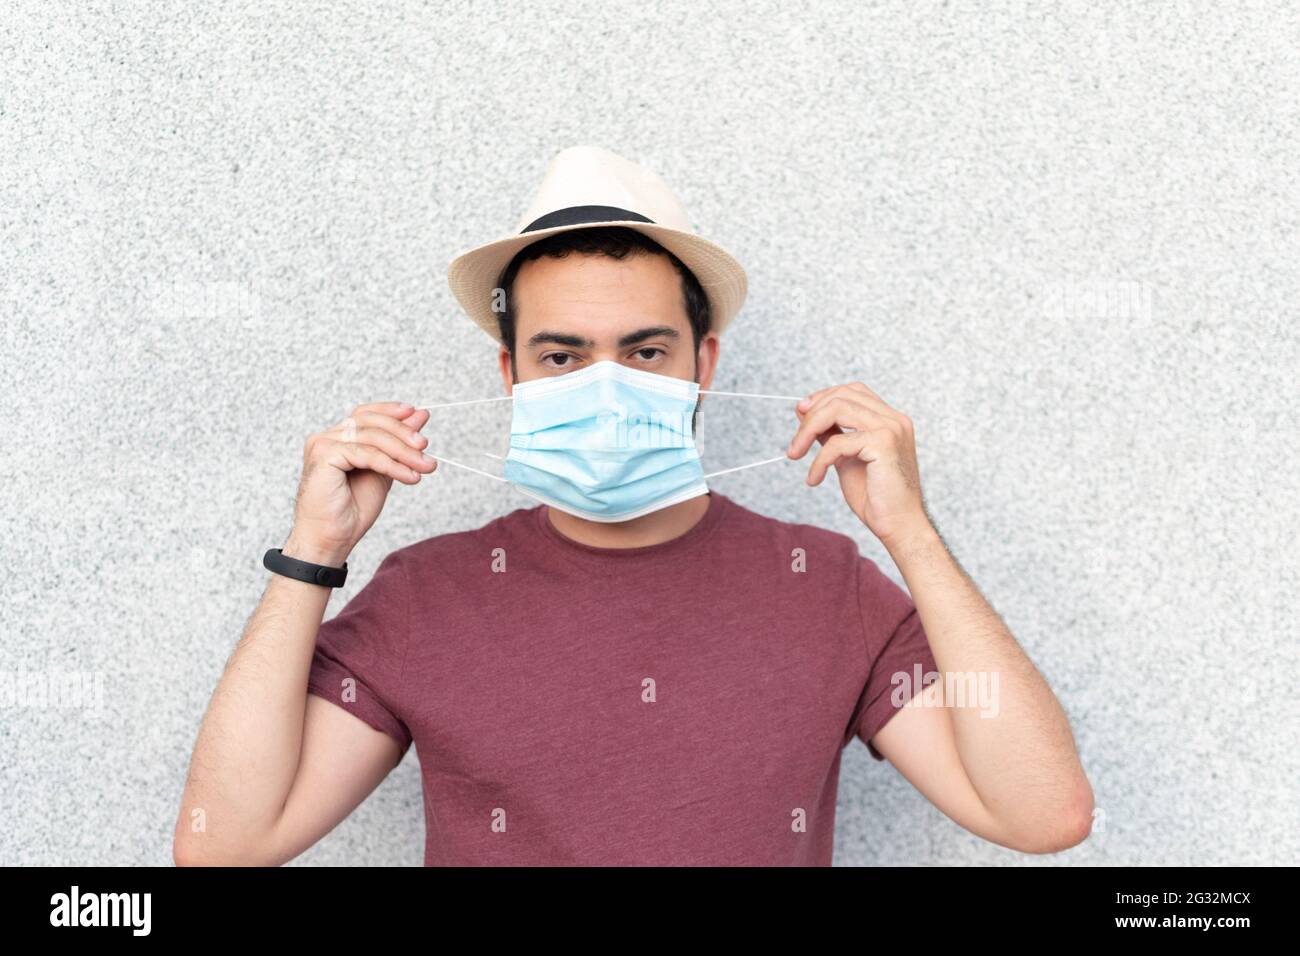 Young man with hat putting on blue mask Stock Photo - Alamy